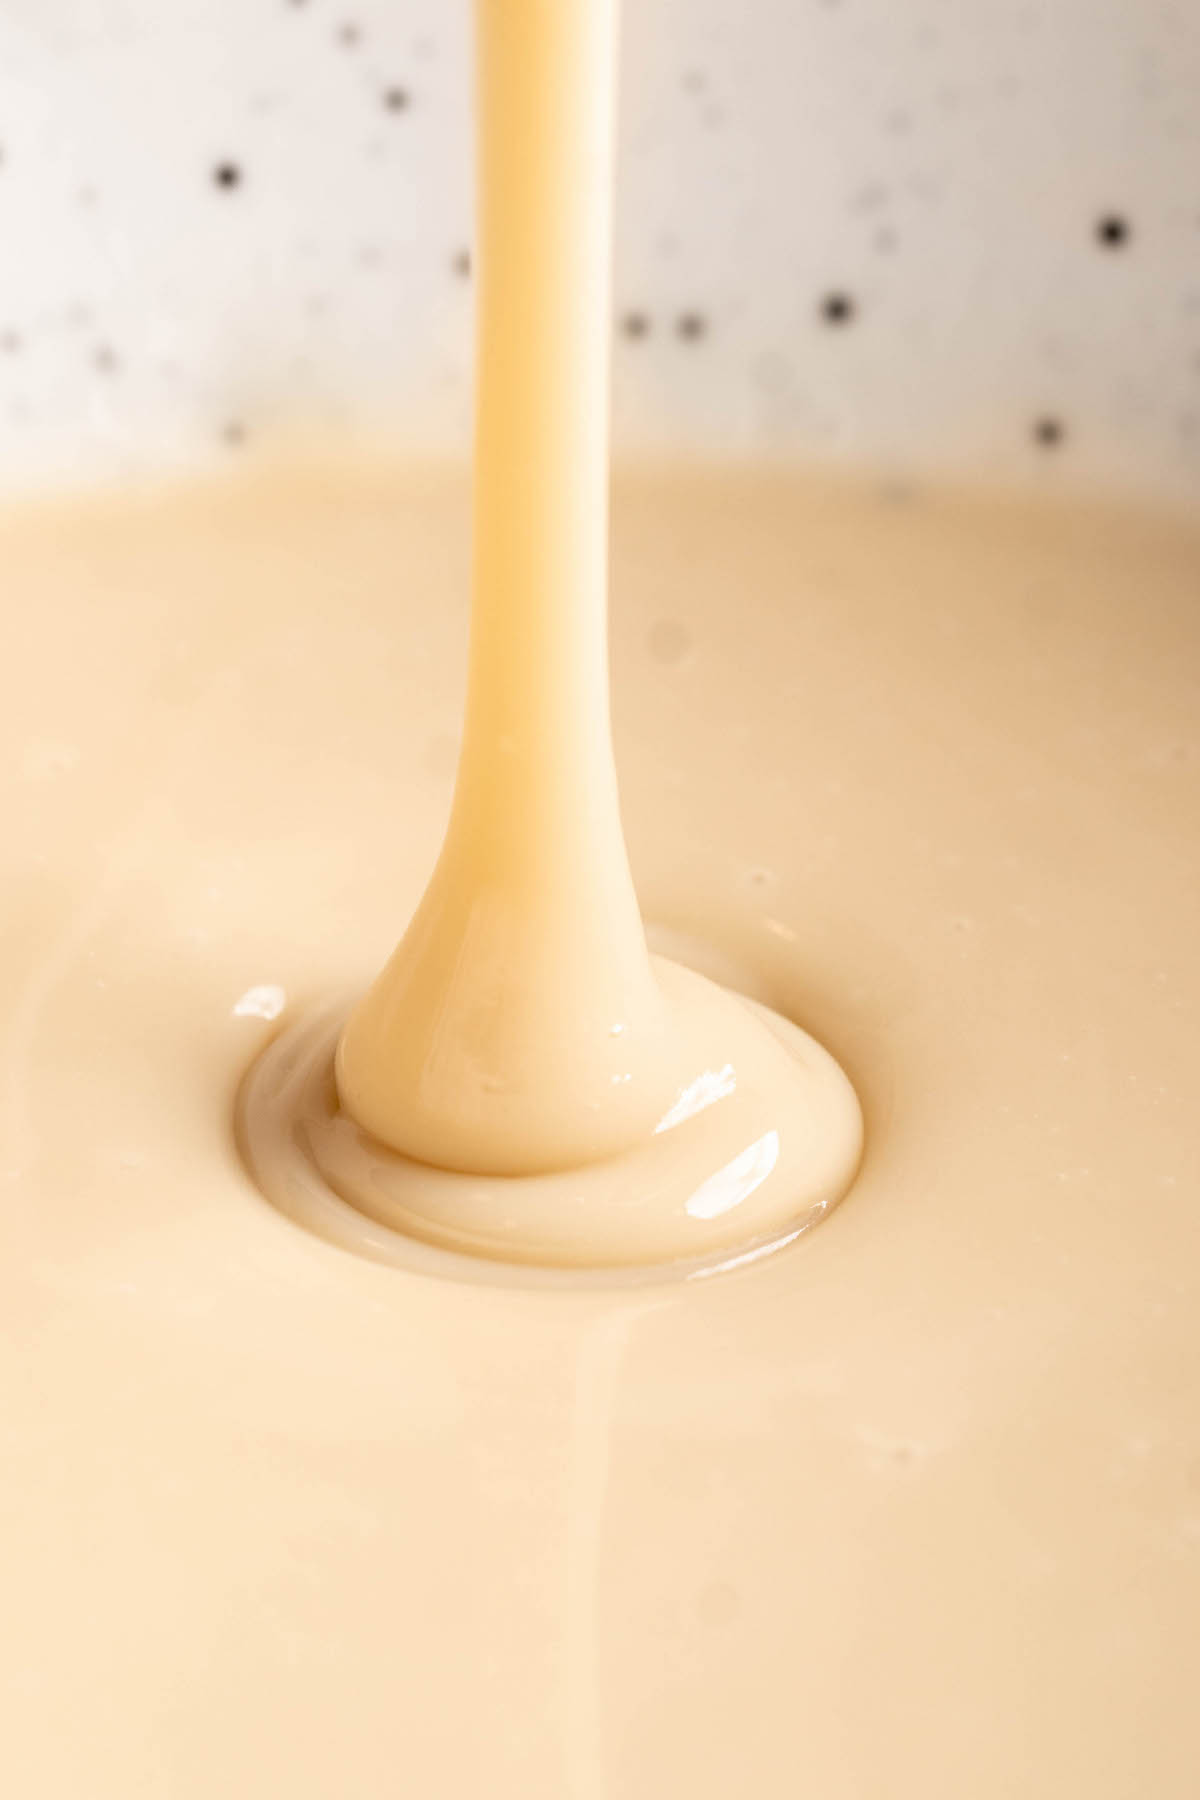 Closeup showing thickness of vegan condensed milk being drizzled into bowl